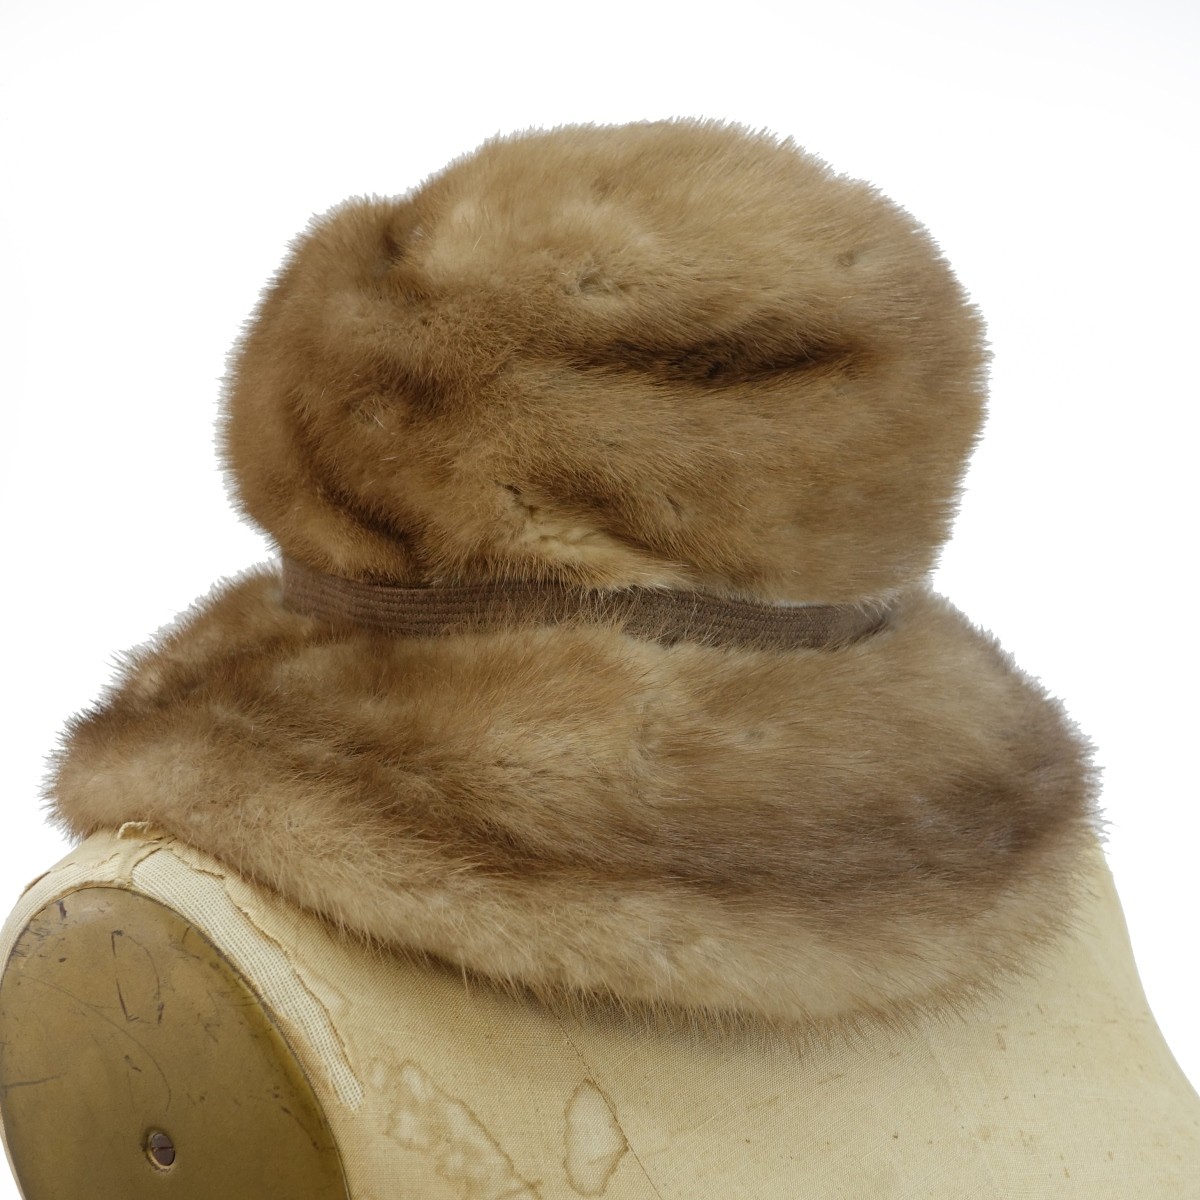 Two Mink Hats